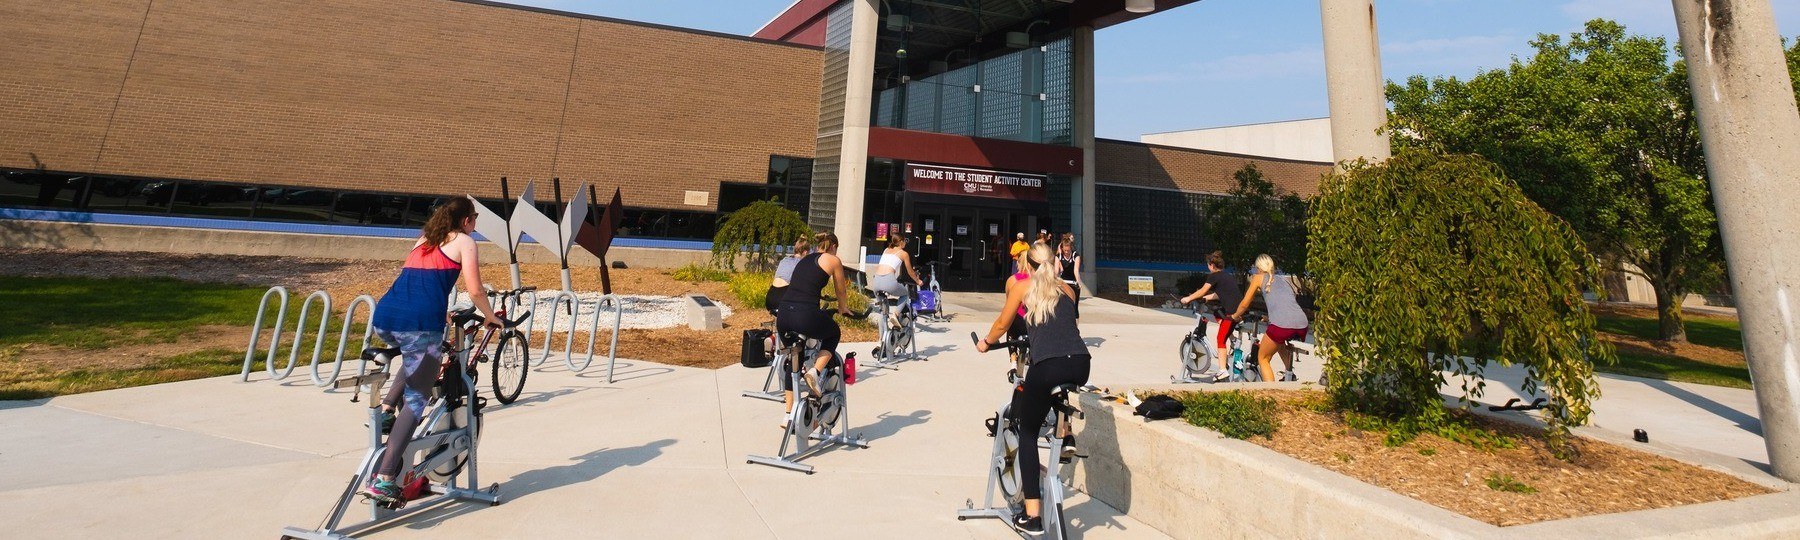 CMU University Recreation outdoor cycling class at the Student Activity Center